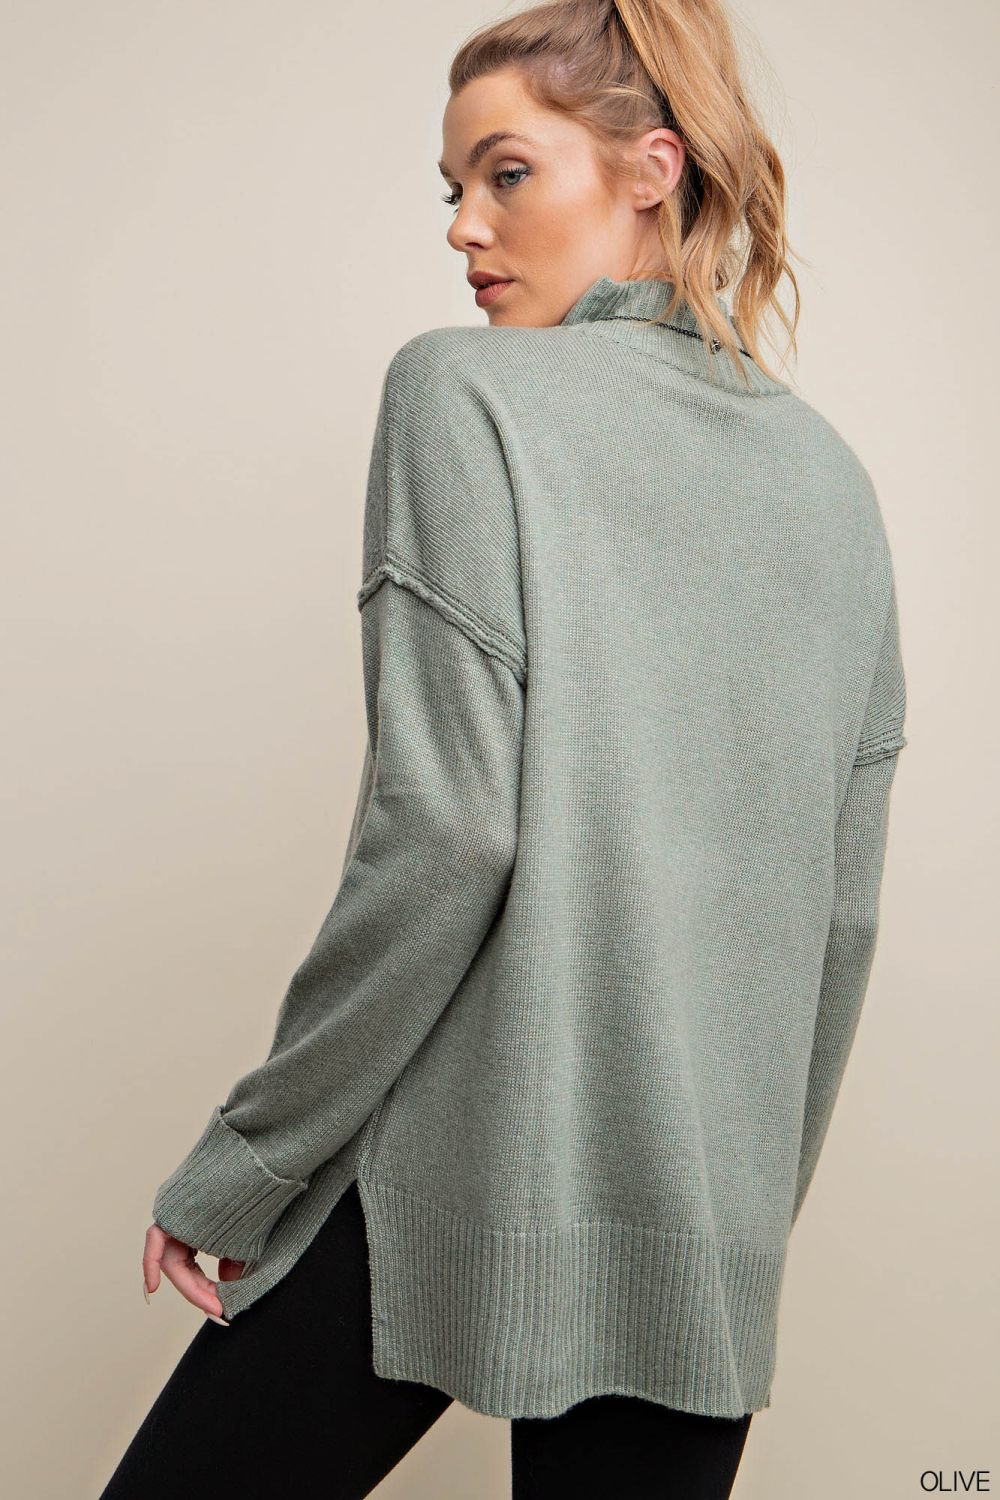 Olive Turtle Neck Long Sleeve Sweater Top